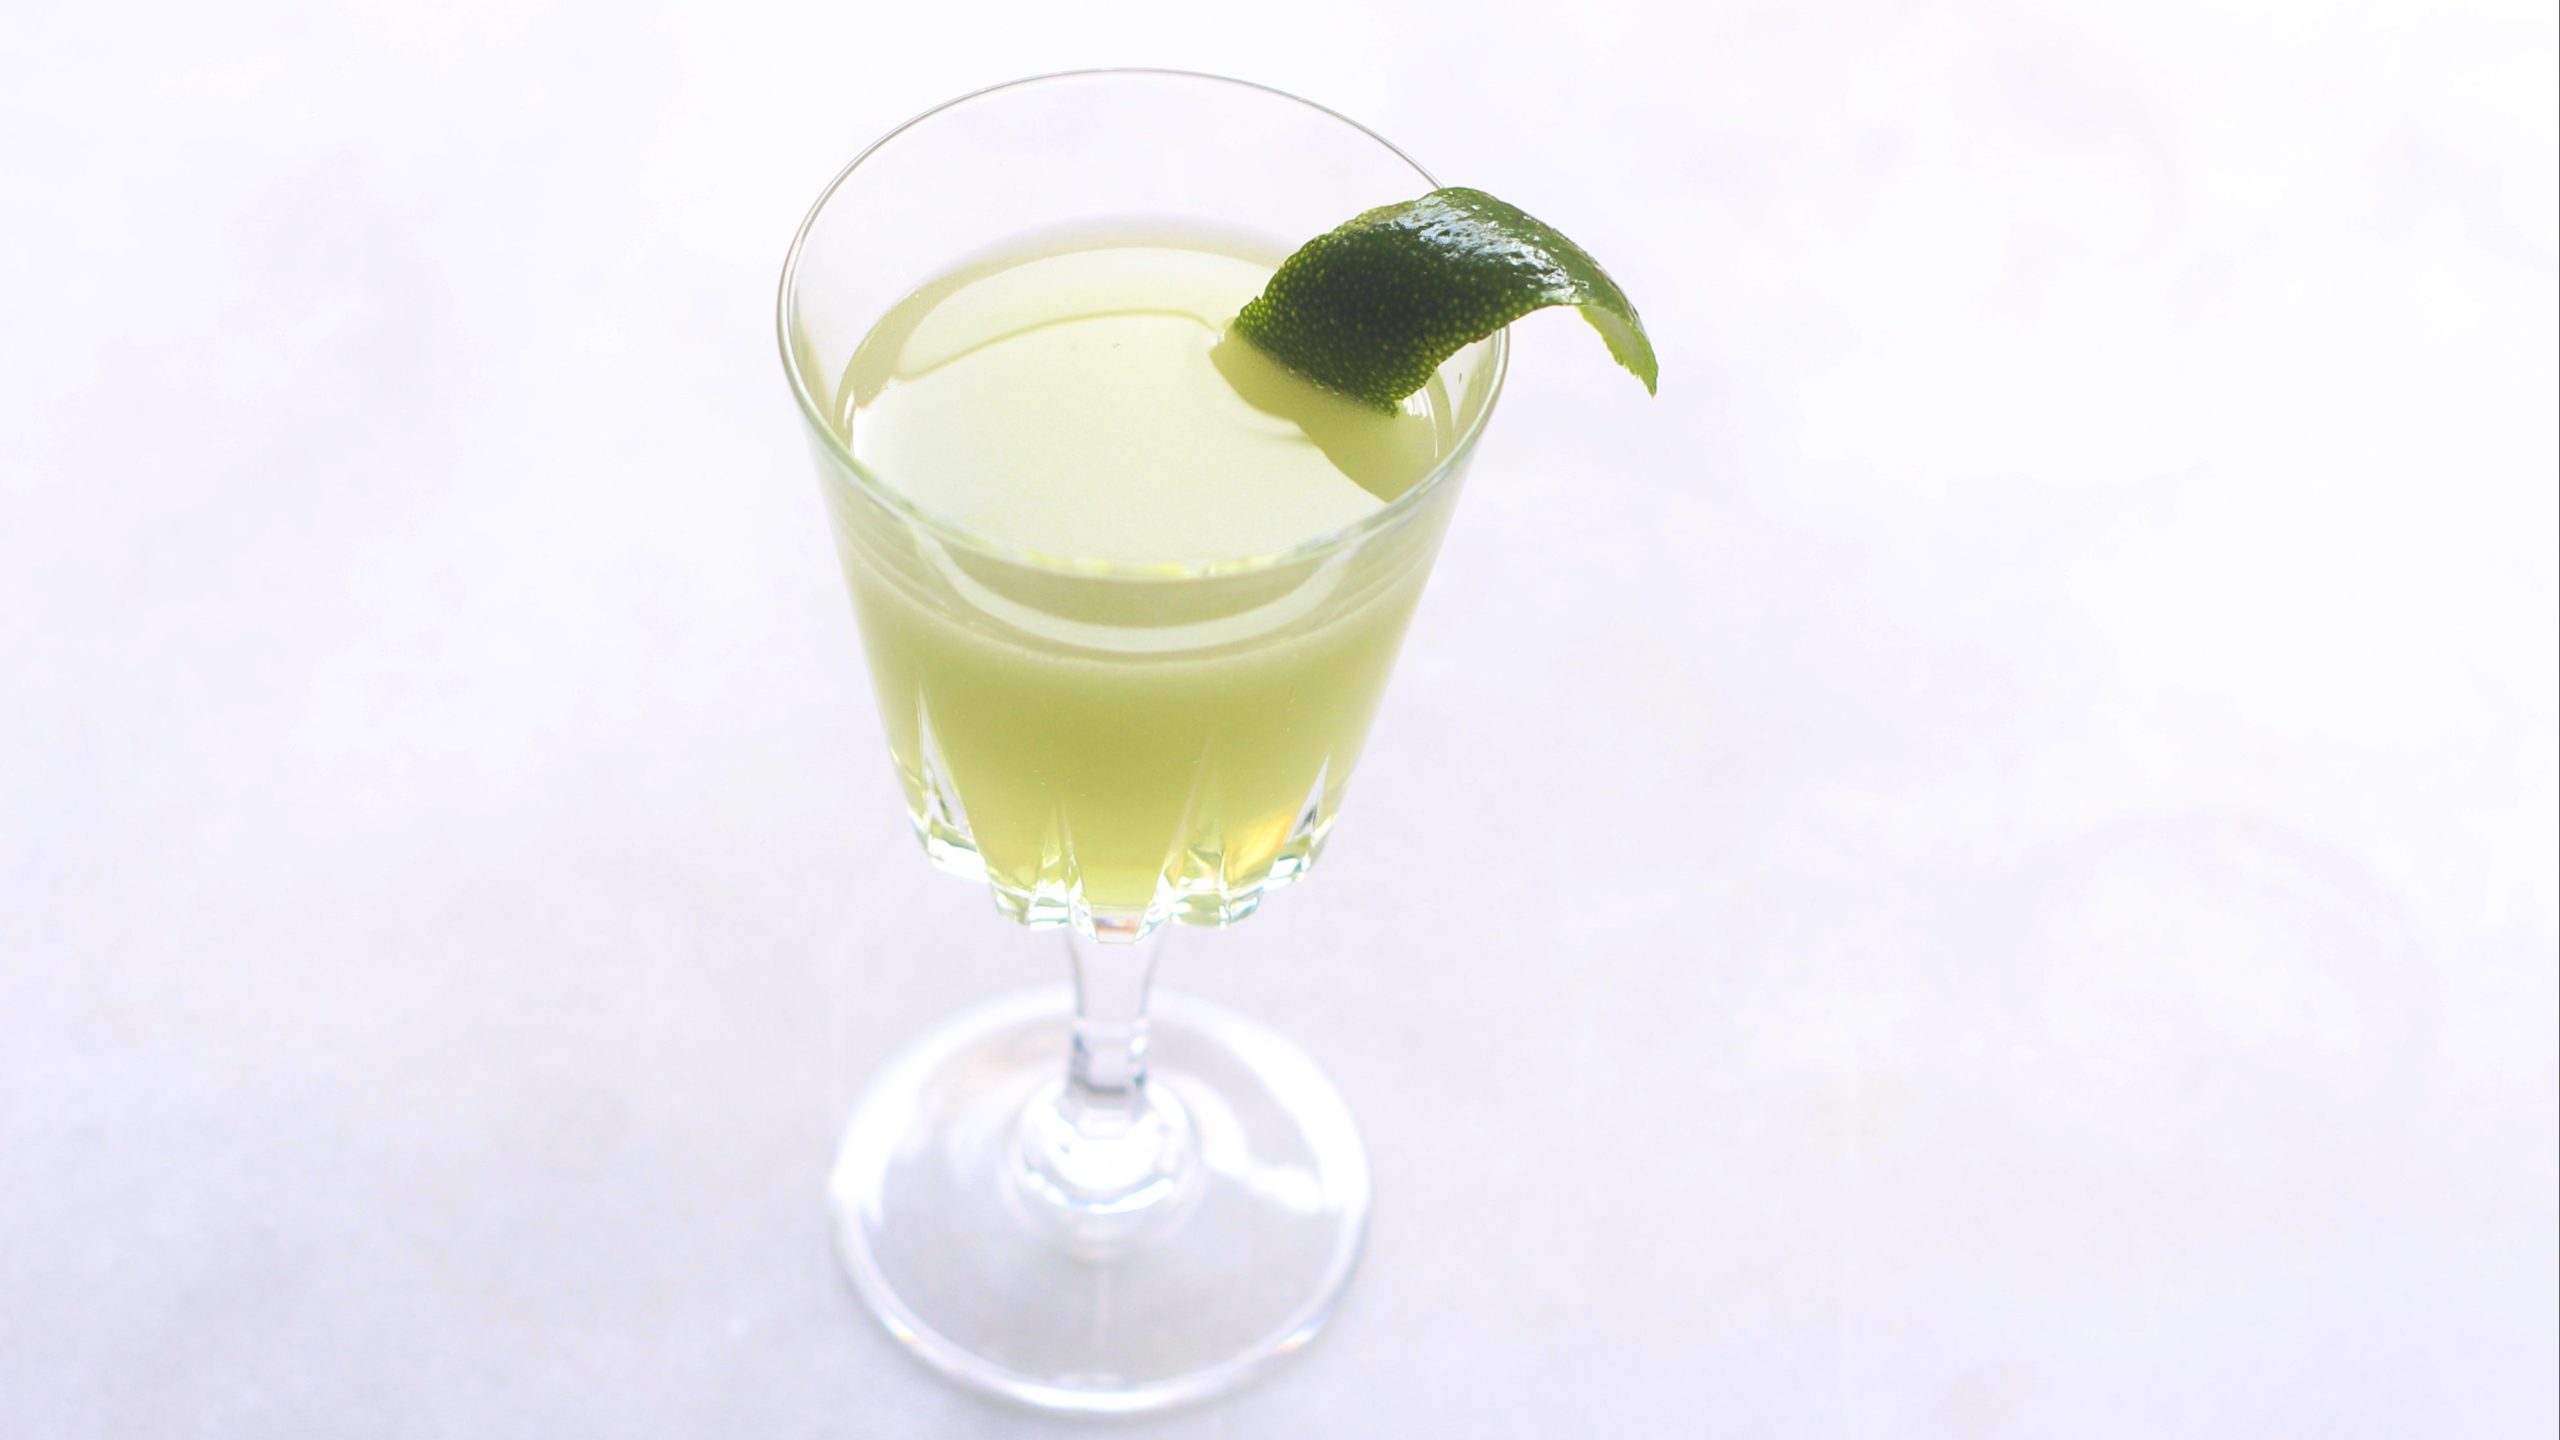 Chartreuse and Tequila Make a Surprisingly Good Team